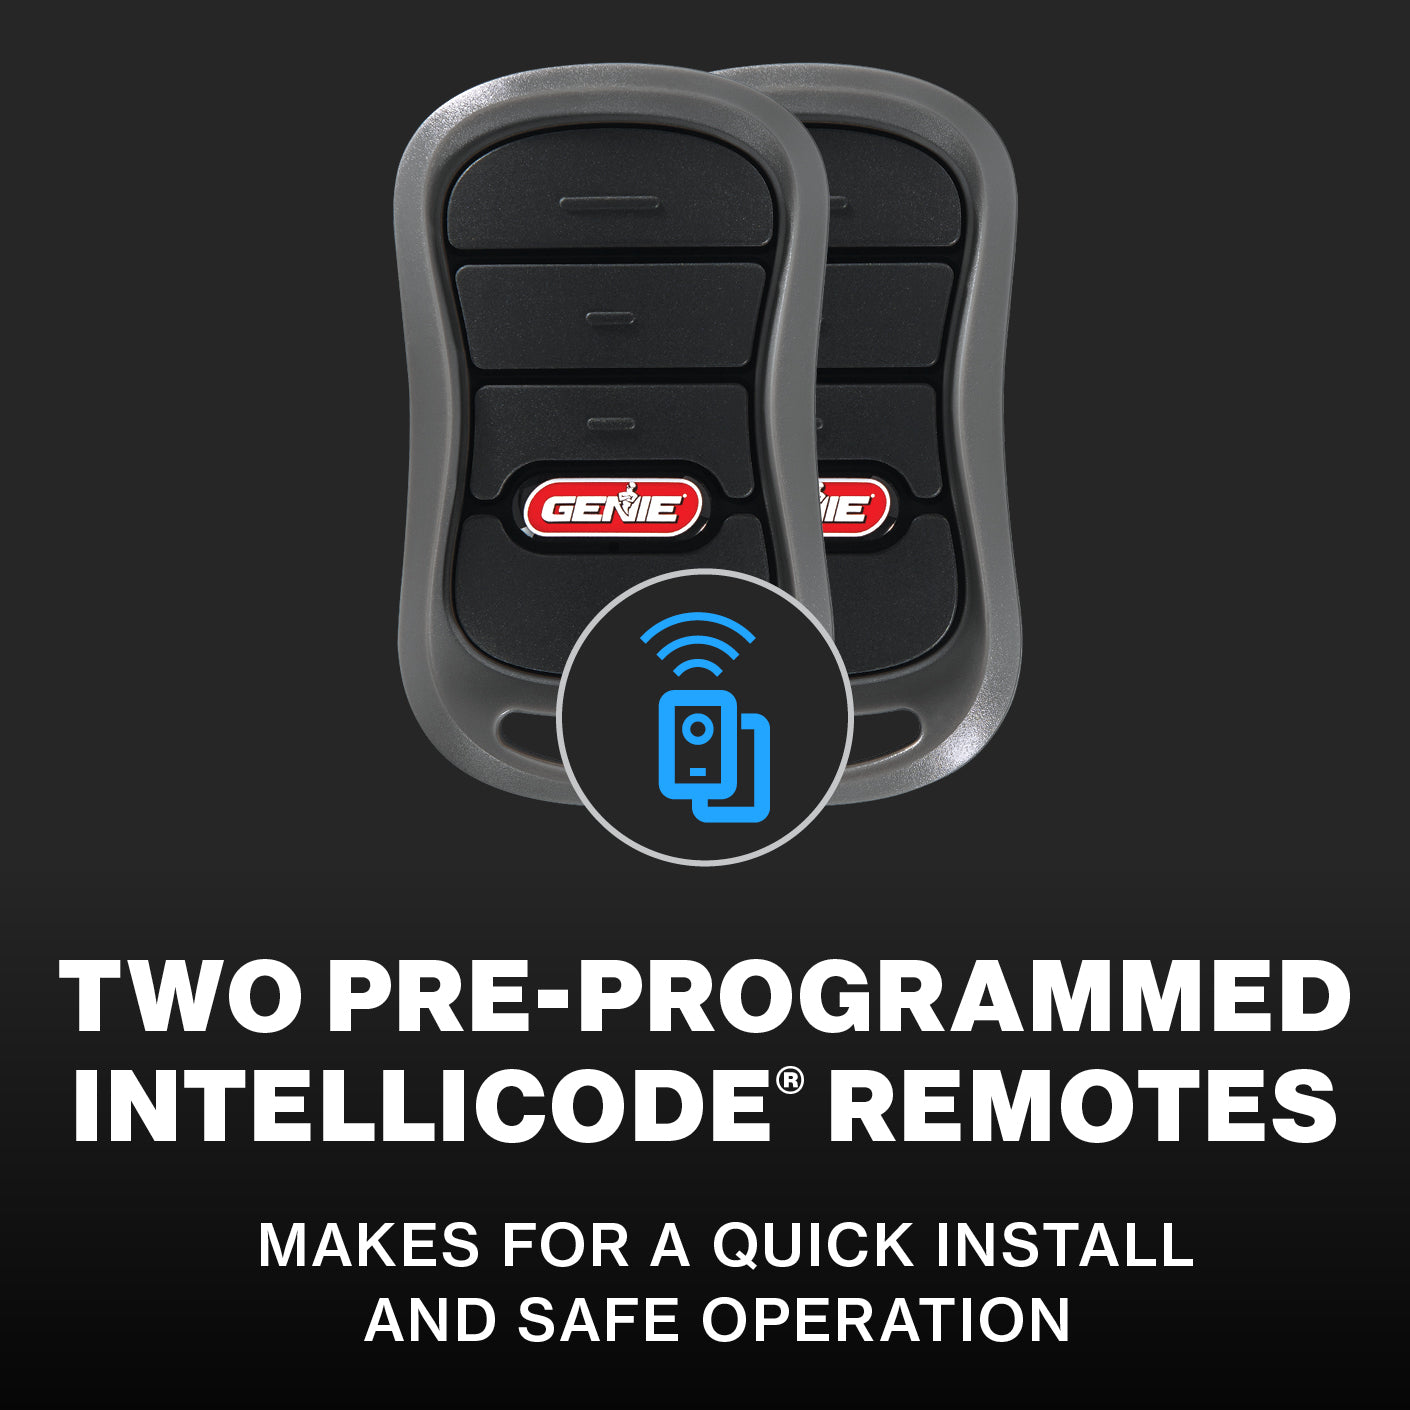 Two preprogrammed remotes included with the Genie QuietLift Connect garage door opener, makes installation easier